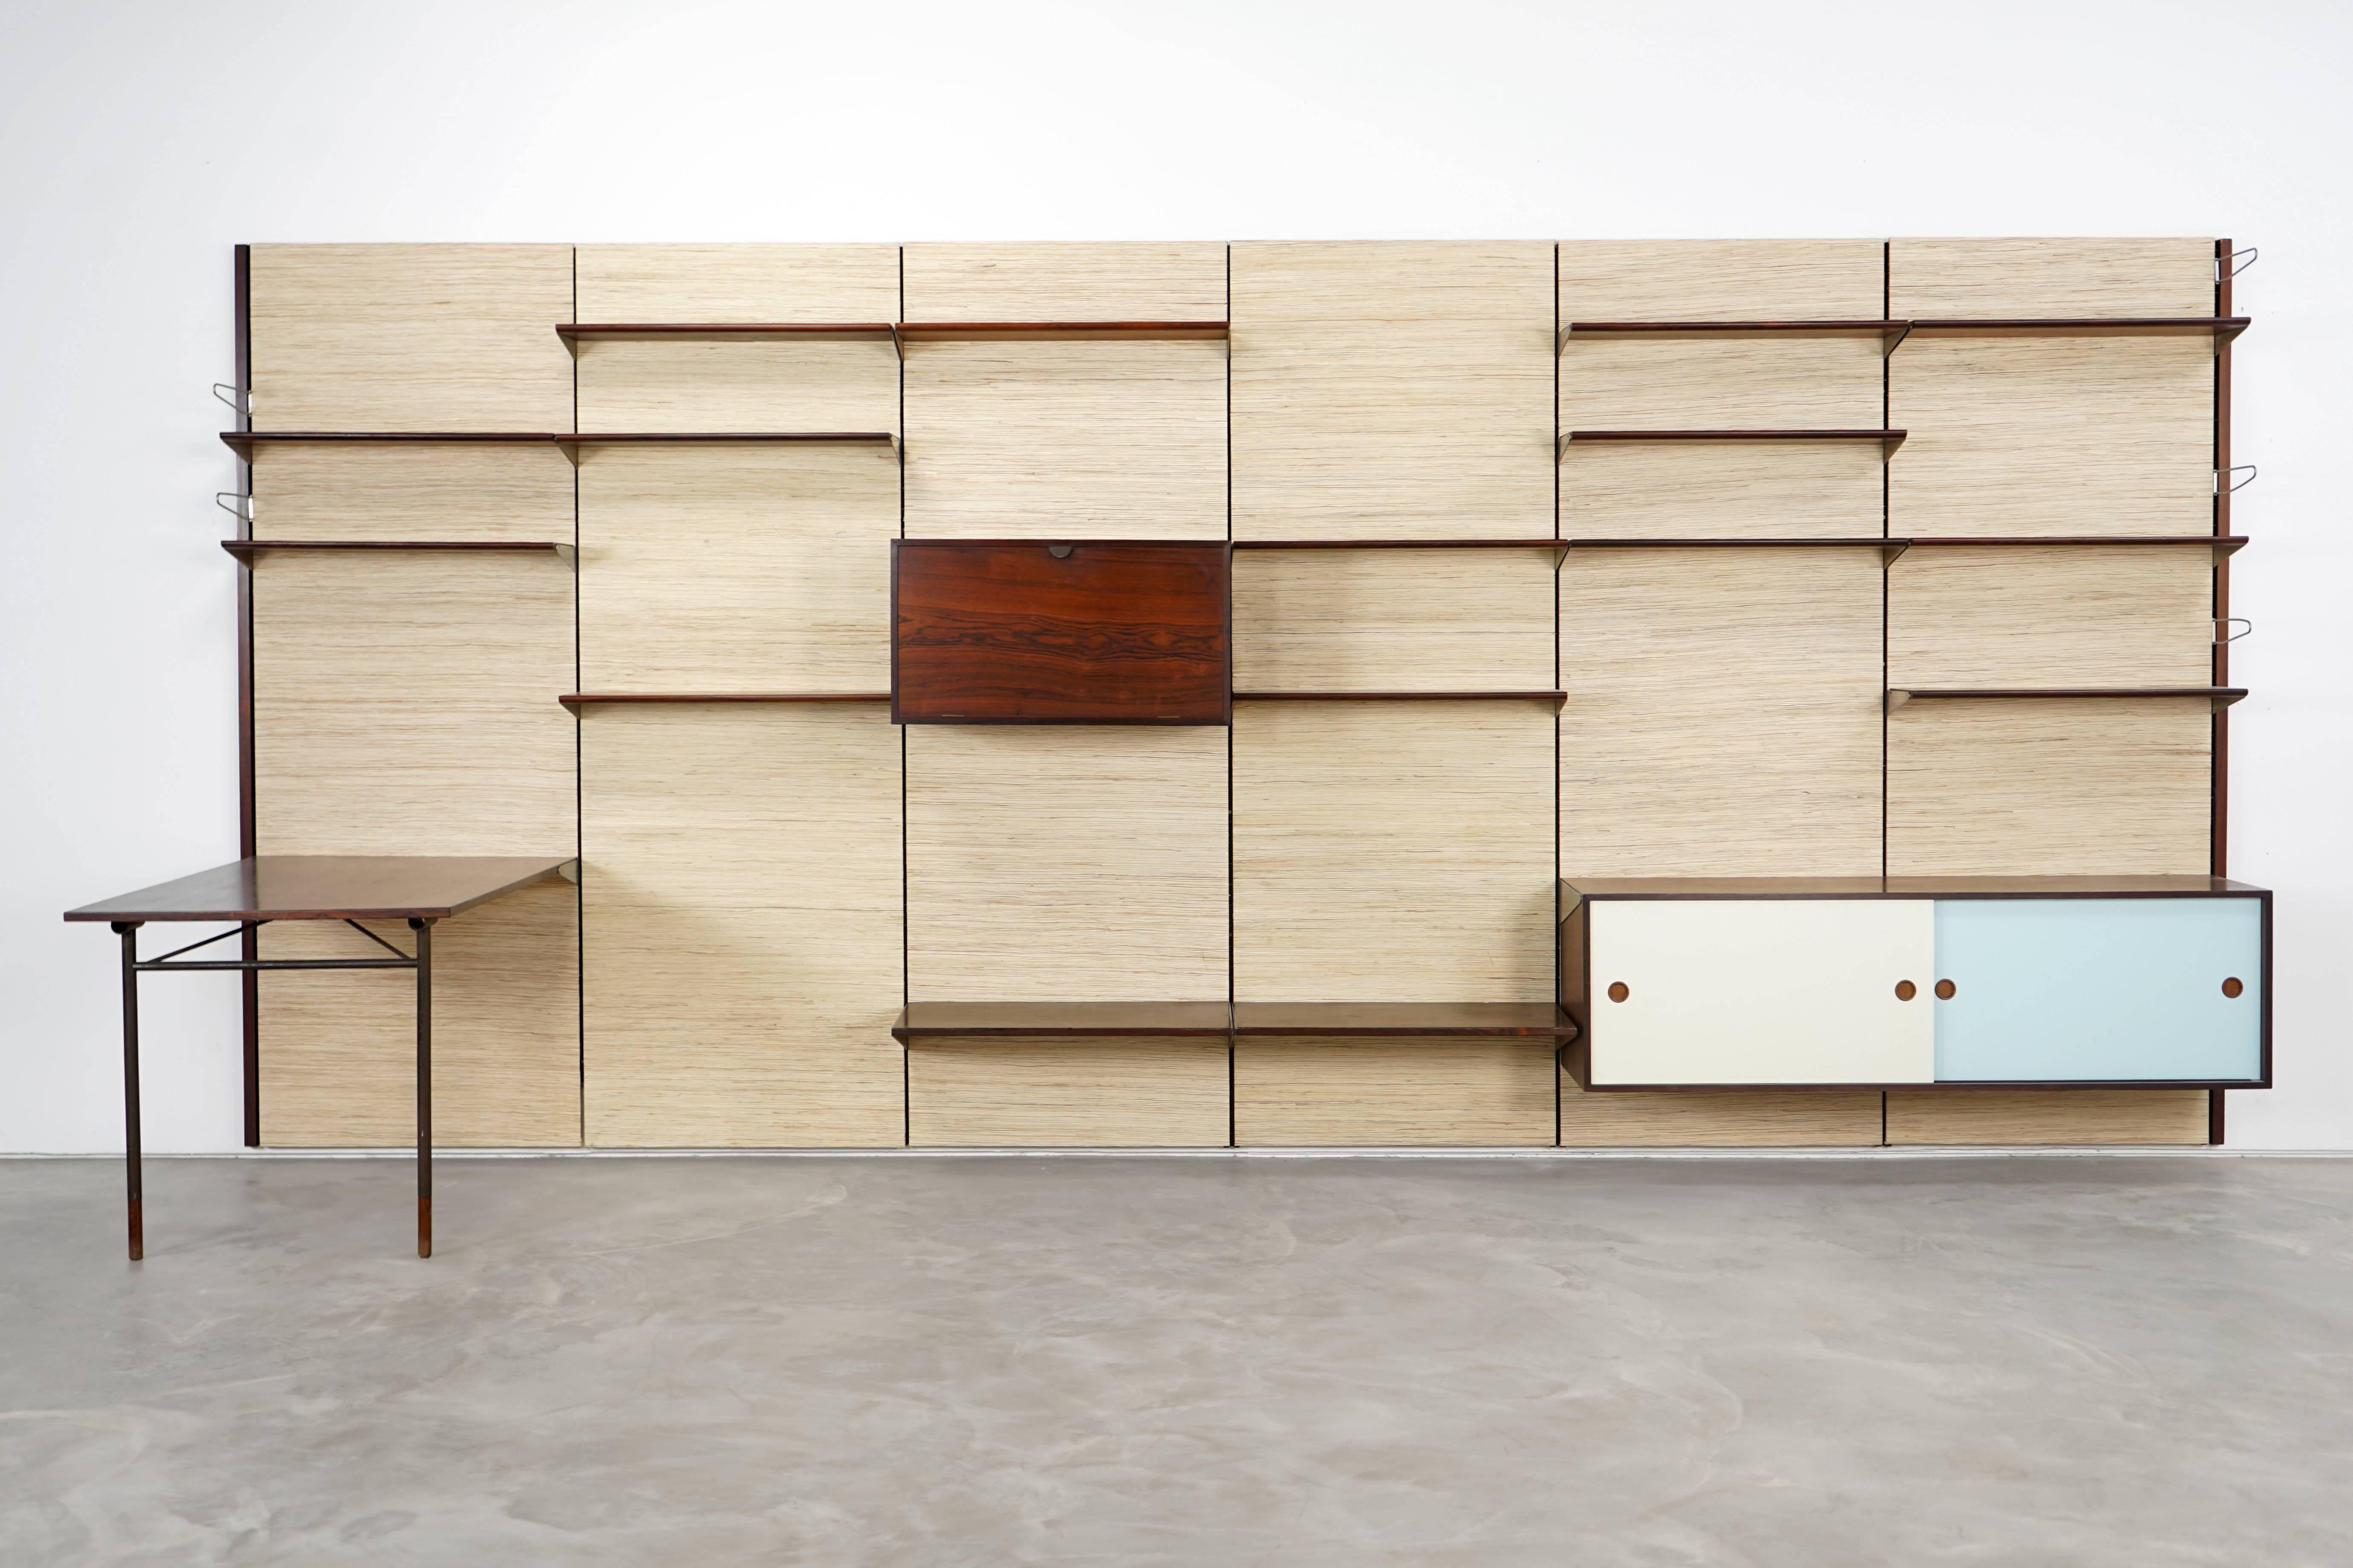 Stunning shelving system designed by Finn Juhl for Bovirke in 1953 (labeled Bovirke). This wall unit features seagrass wall panels. Produced during the 1960s, restored condition.

Dimensions total: 483 cm x 215 cm x 35 cm [W x H x D]
Table: 120